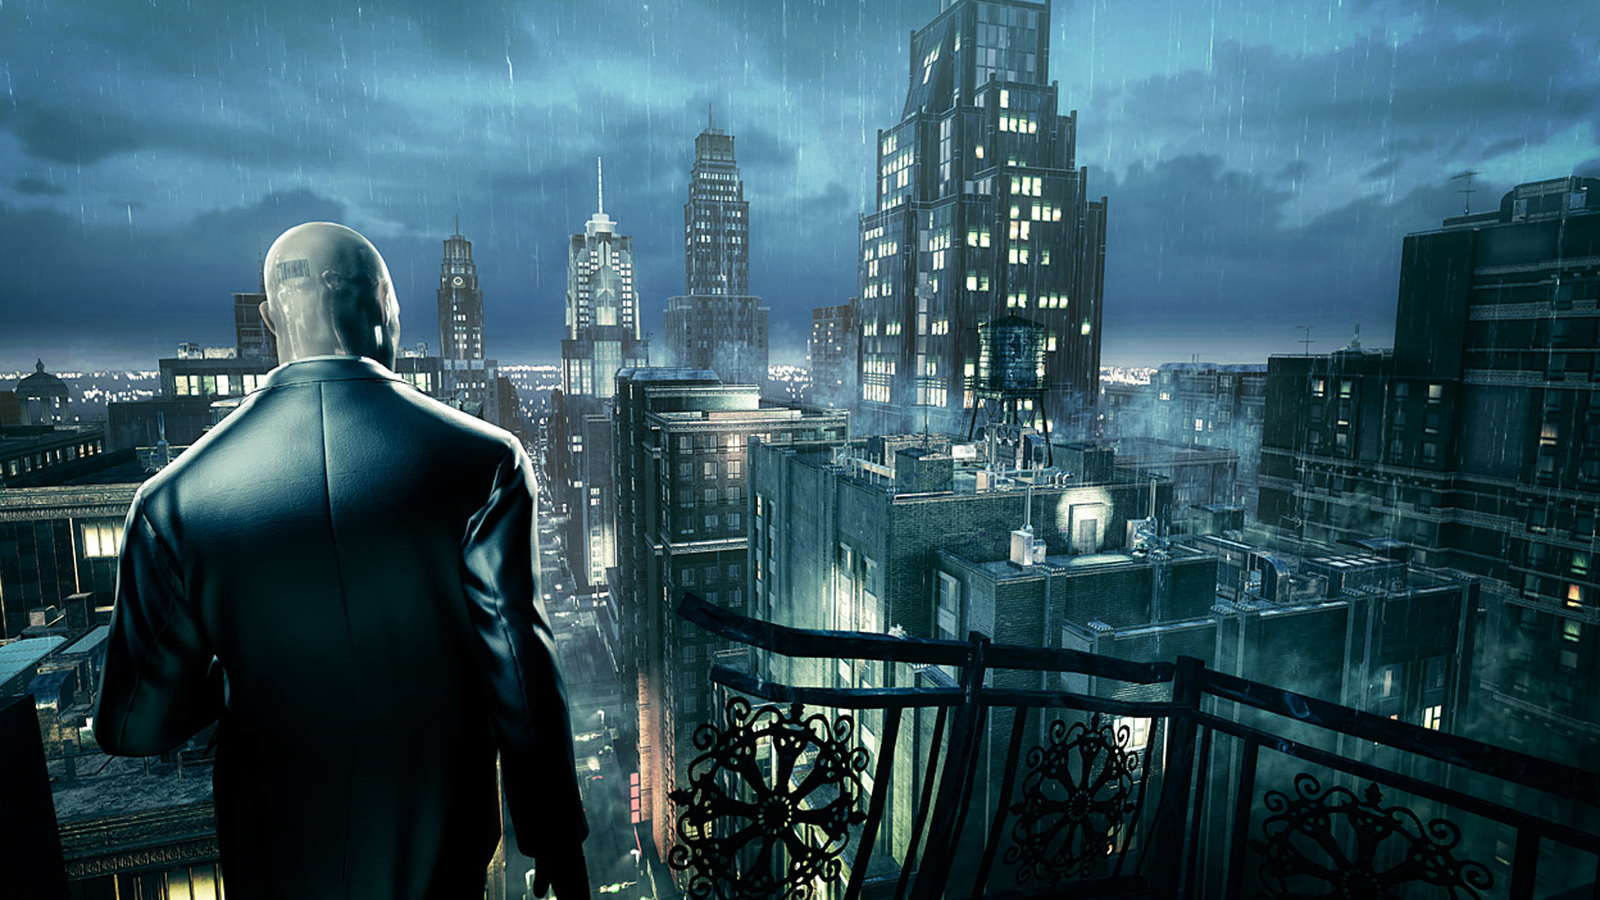 hitman absolution ps5 download free